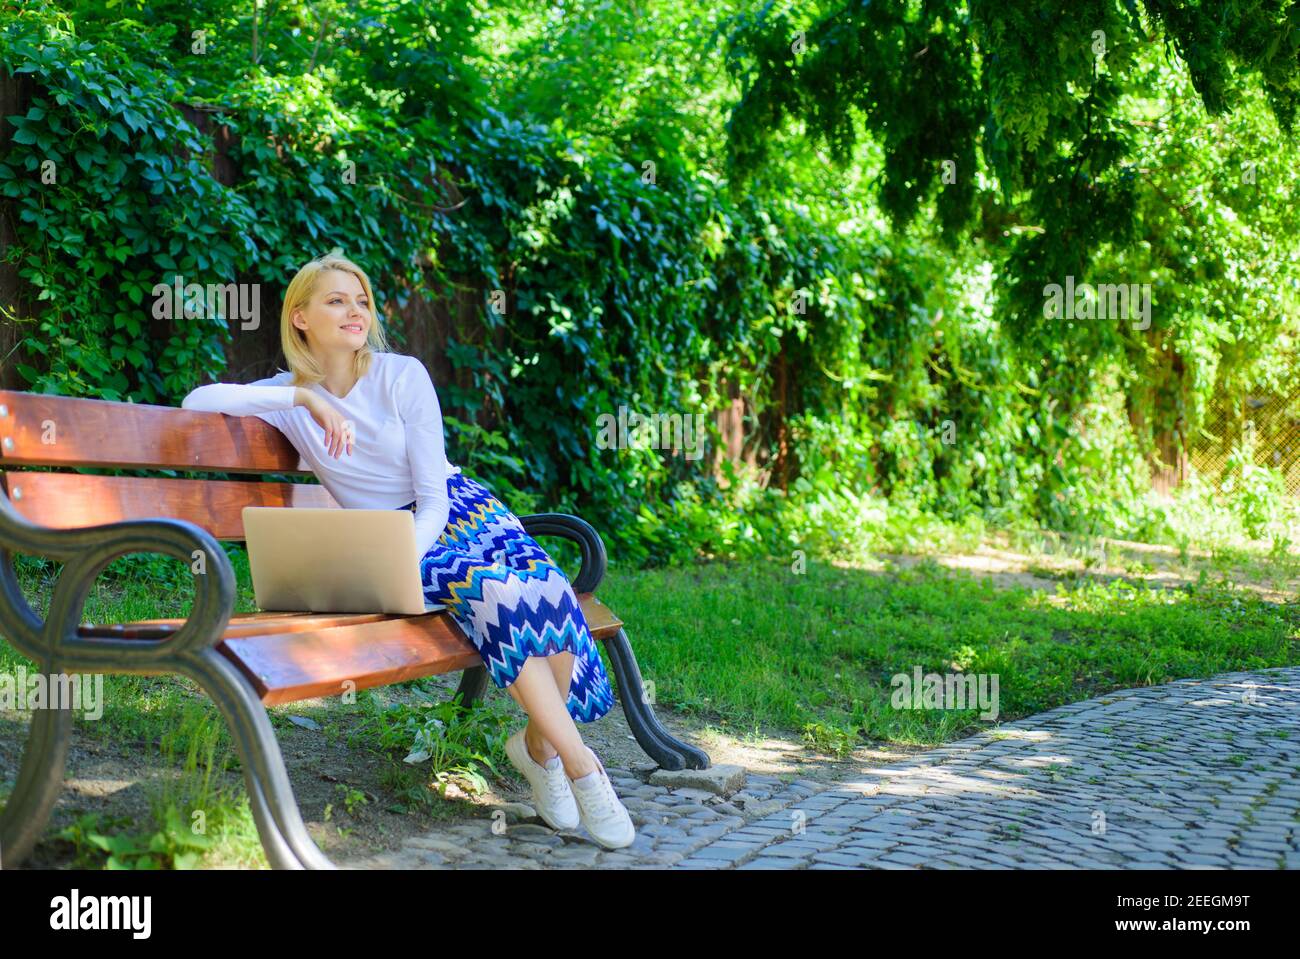 Shopping online. Girl sit bench with notebook. Woman with laptop in park enjoy green nature and fresh air. Girl dreamy takes advantage of online shopping. Save your time with shopping online. Stock Photo